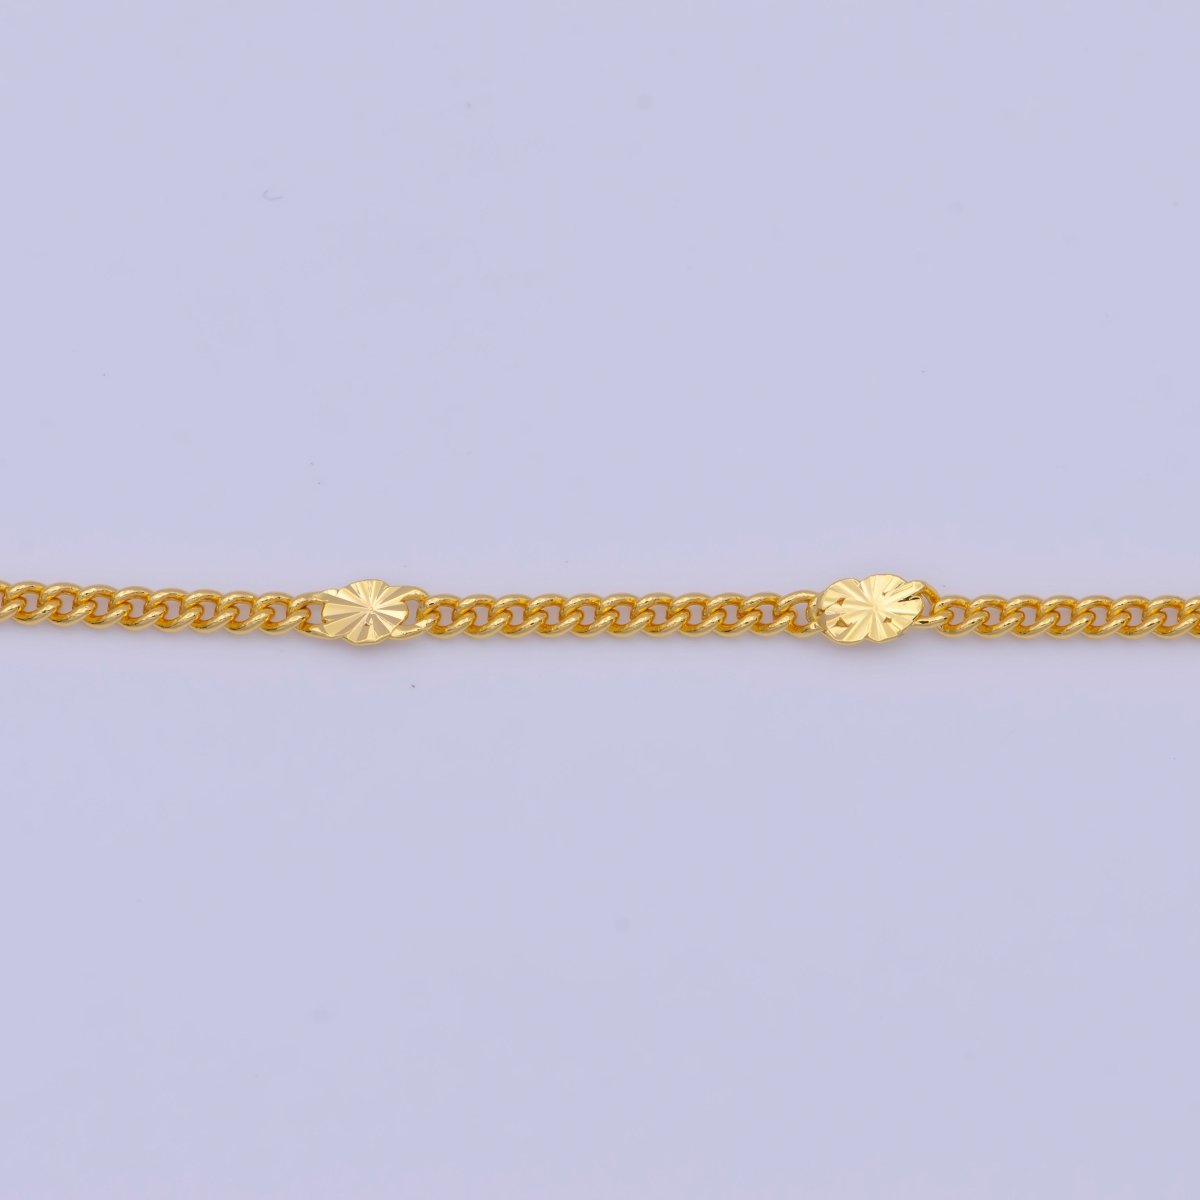 24K Gold Filled Dainty Sunburst Curb Chain Minimalist Necklace Satellite Chain Necklace 1.6mm Width Ready to Wear | WA-1128 WA-1127 Clearance Pricing - DLUXCA